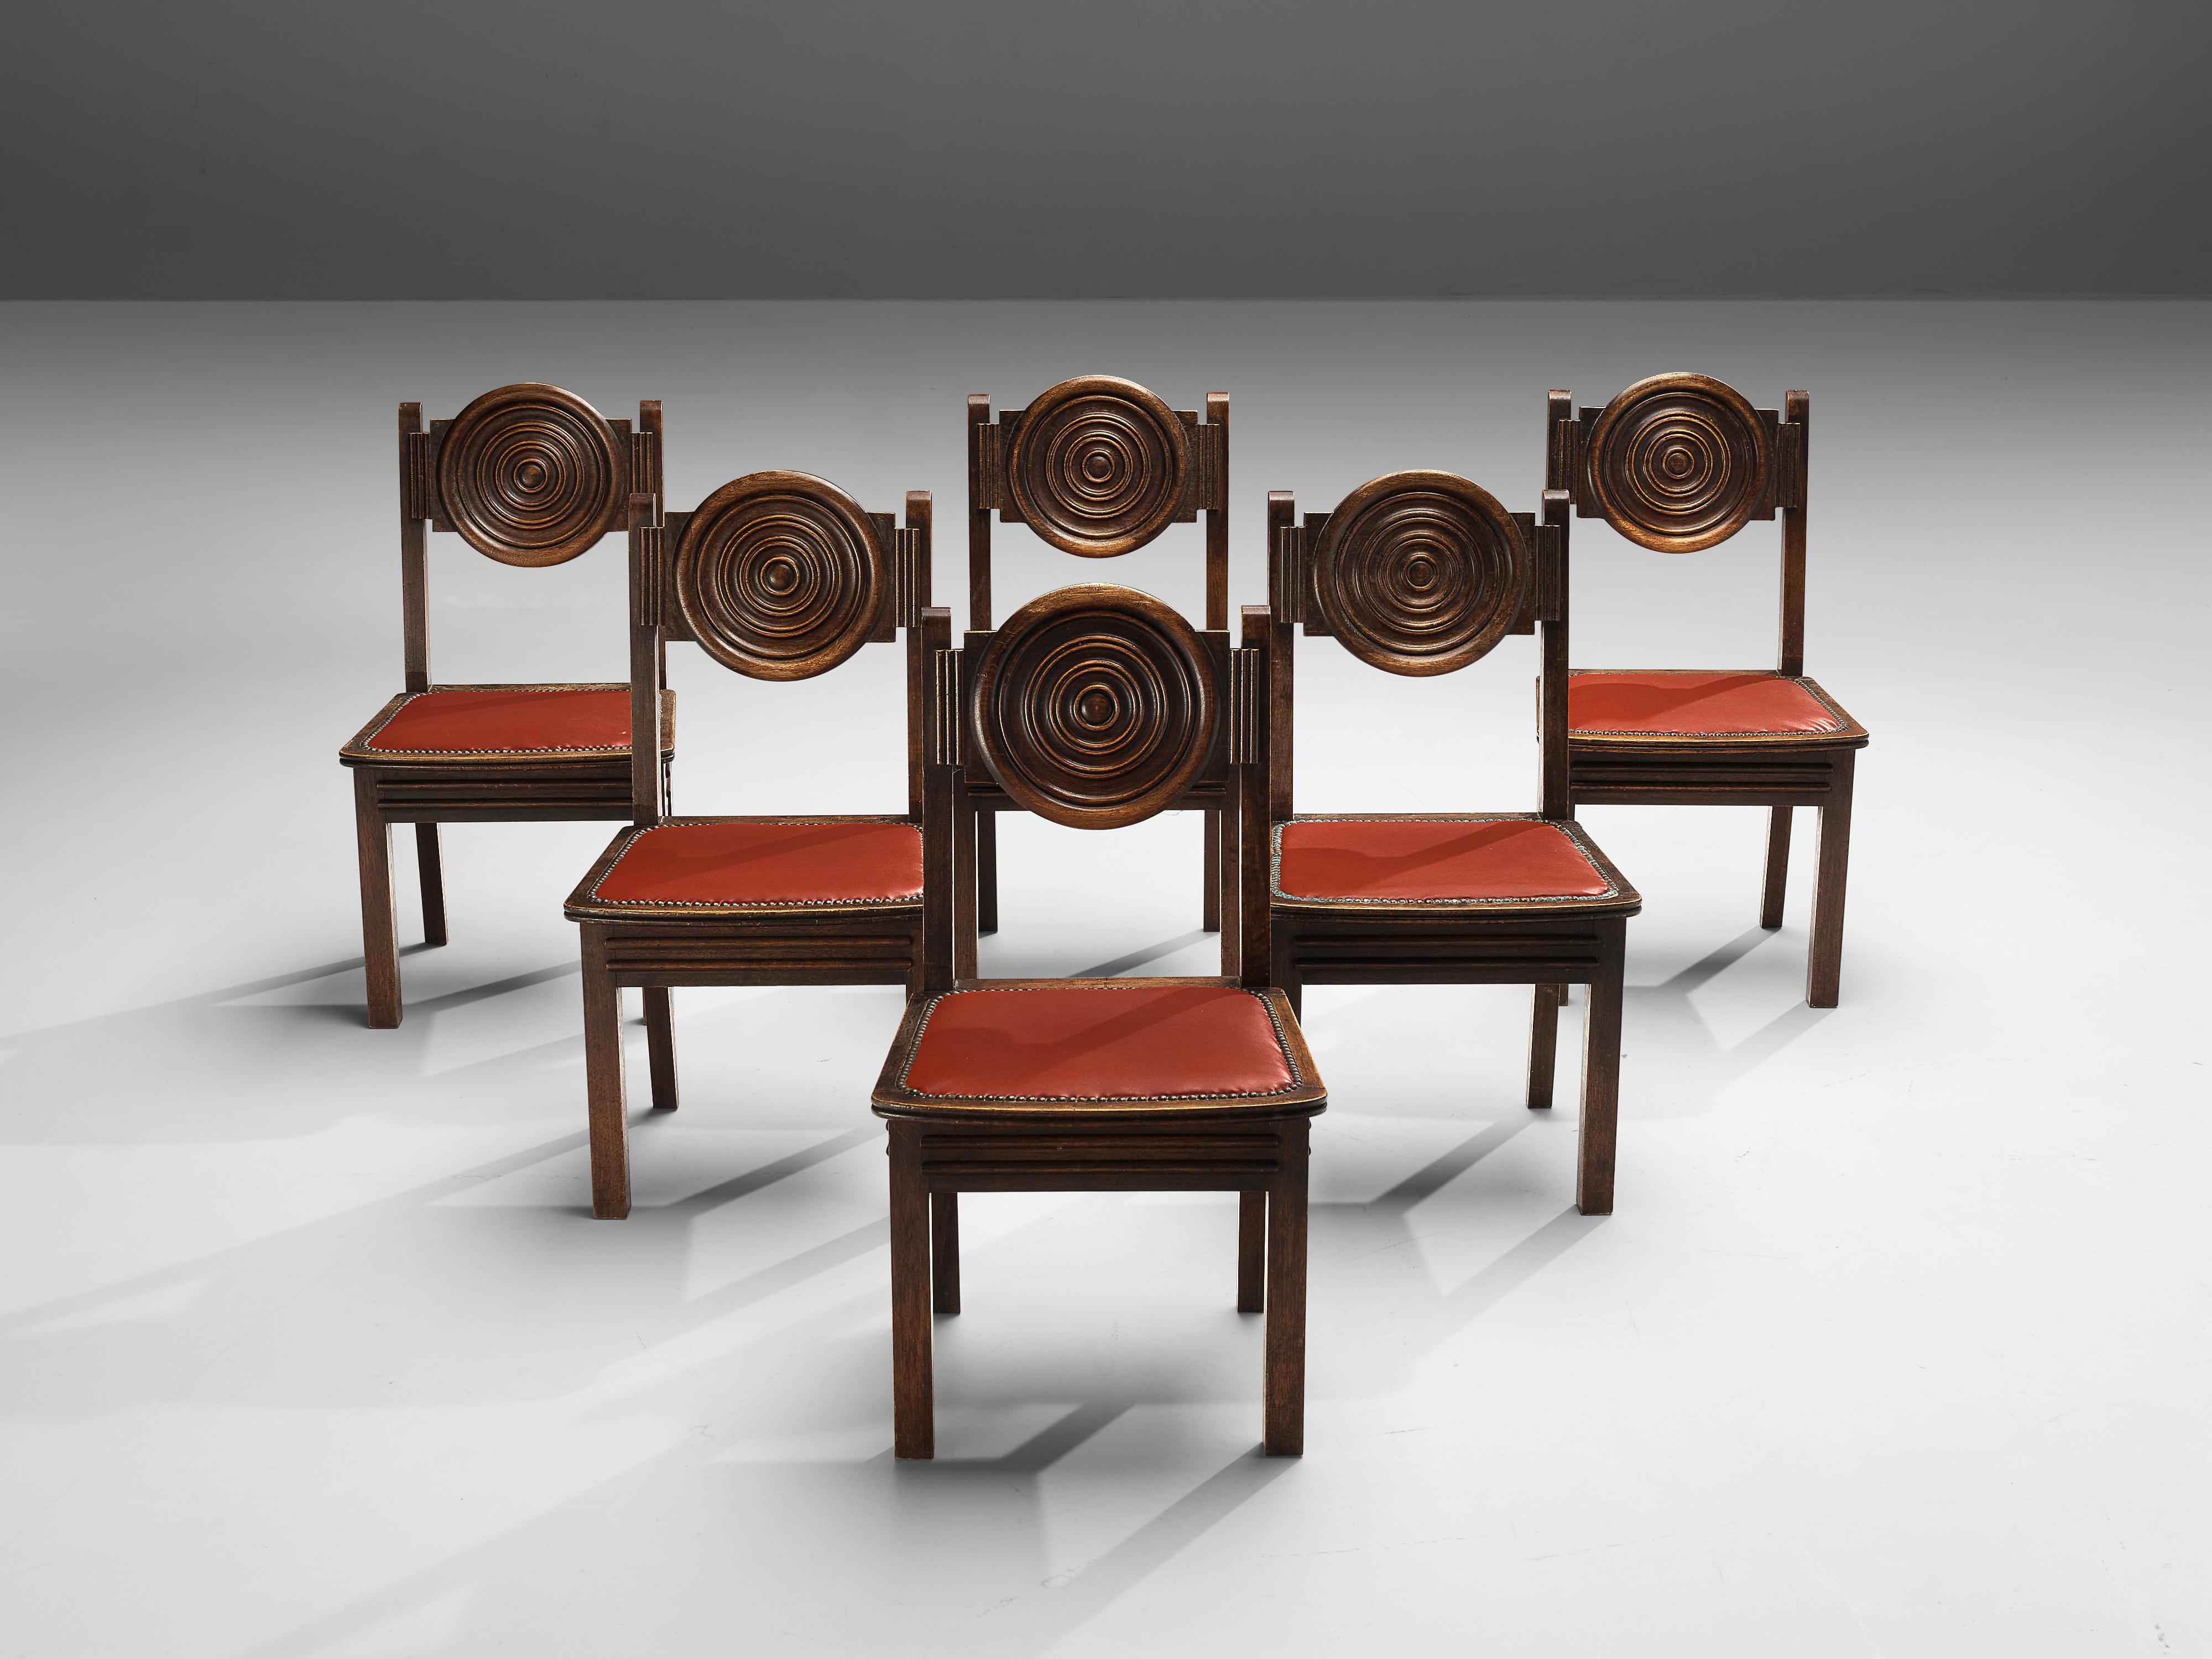 Art Deco dining chairs, stained oak, leatherette, brass, France, 1940s

With their round backrest this set of six French dining chairs catches the eye. Carved rings emphasize the circular form and create a rhythmic relief. But not only the backrest